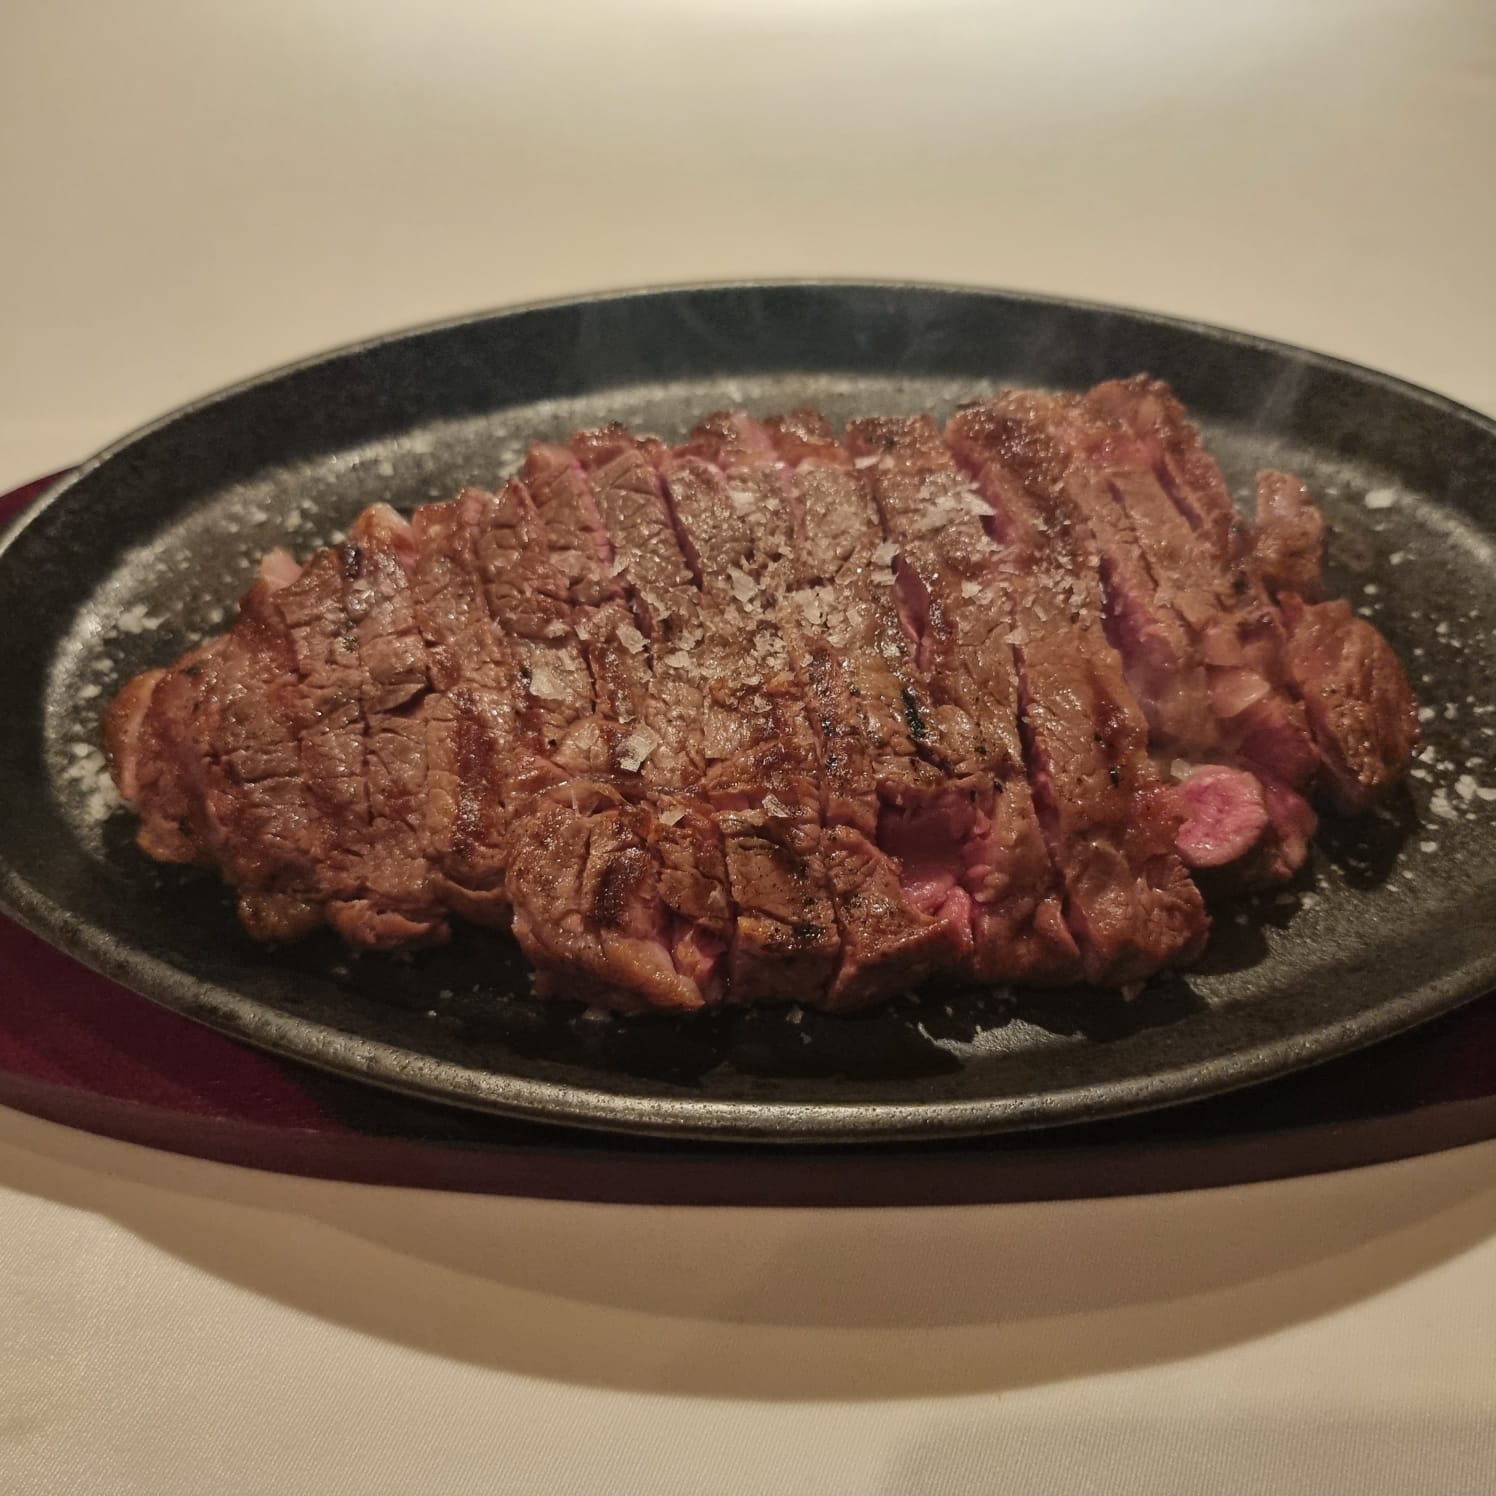 "The tiger" Entrecote or sirloin hell with basmat rice